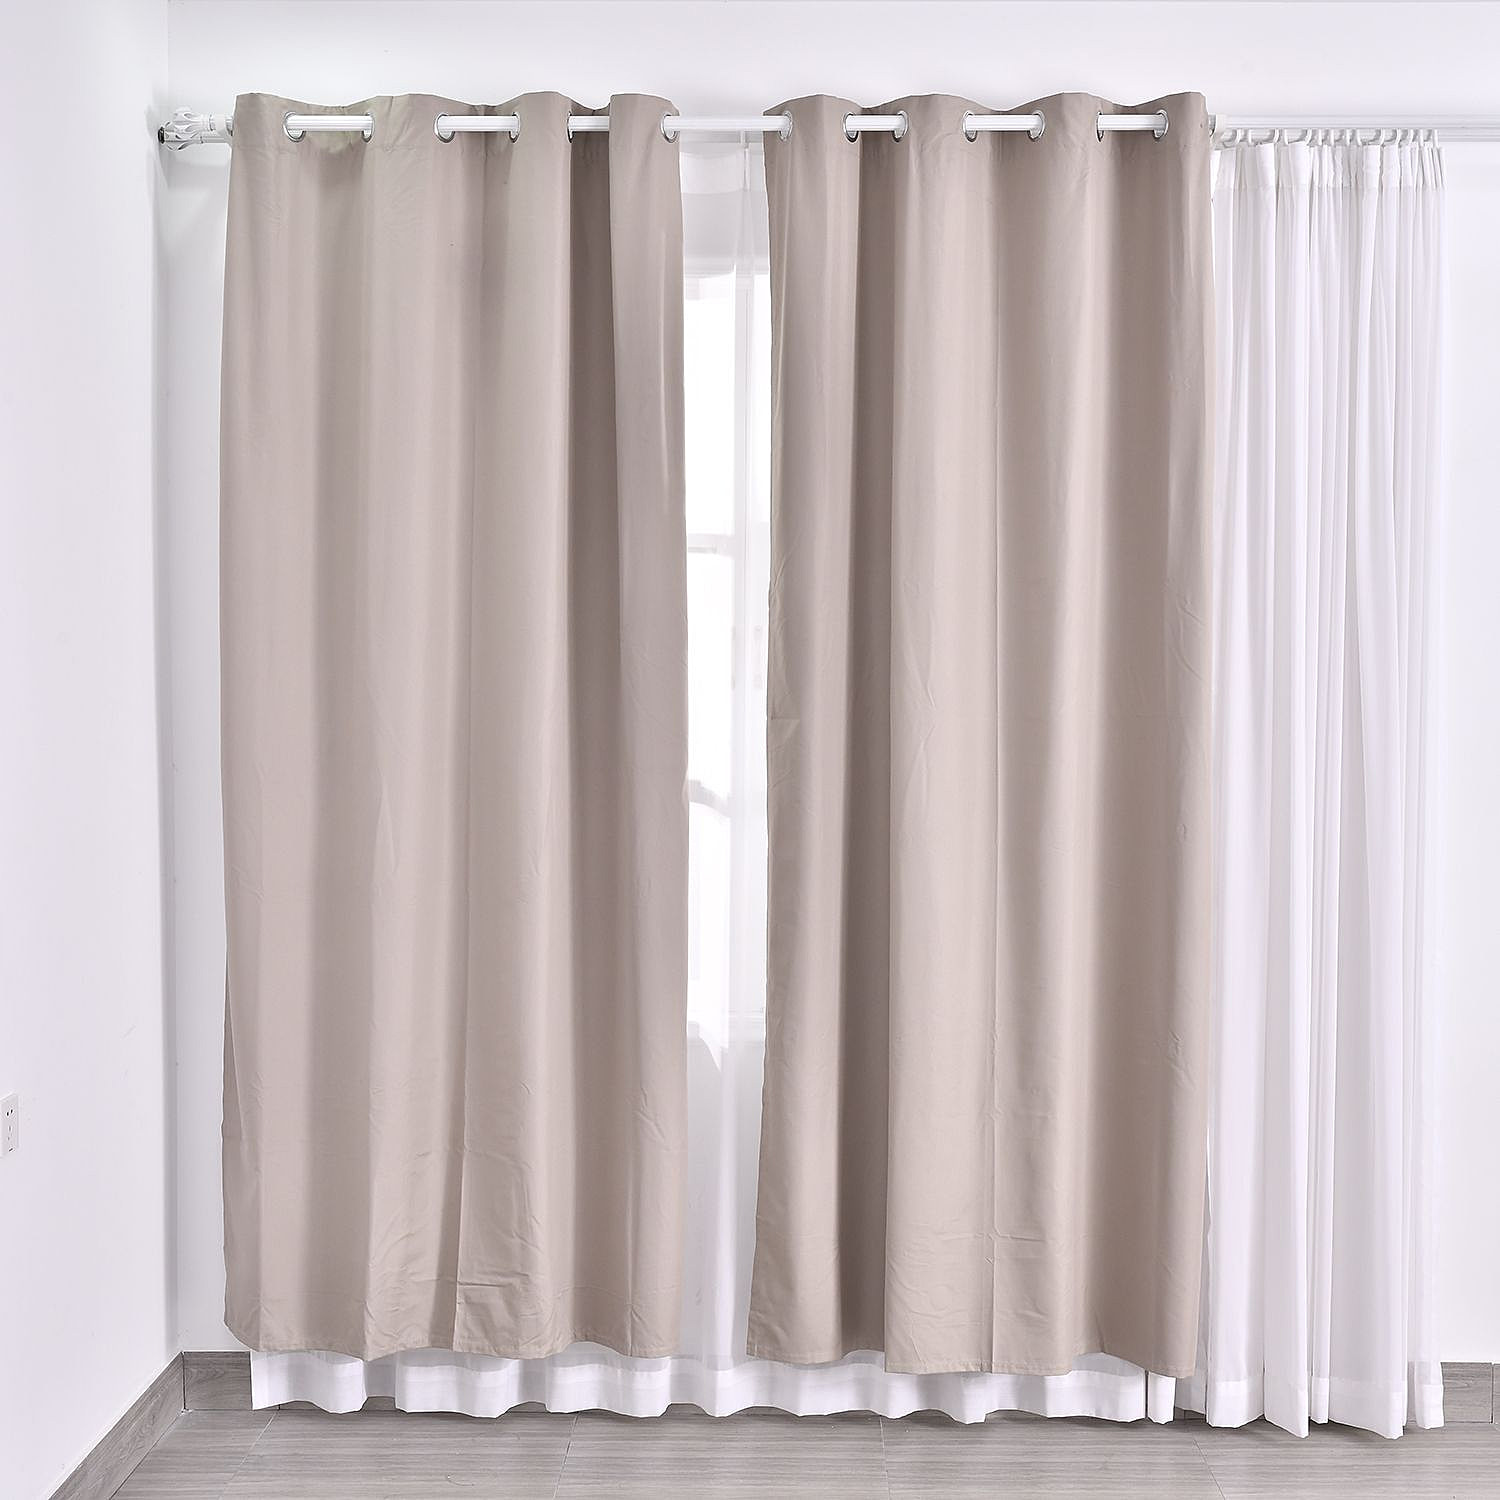 Set-of---Homesmart-Curtains-with-Metal-Eyelets-(Size-240x132-Cm)-Camel